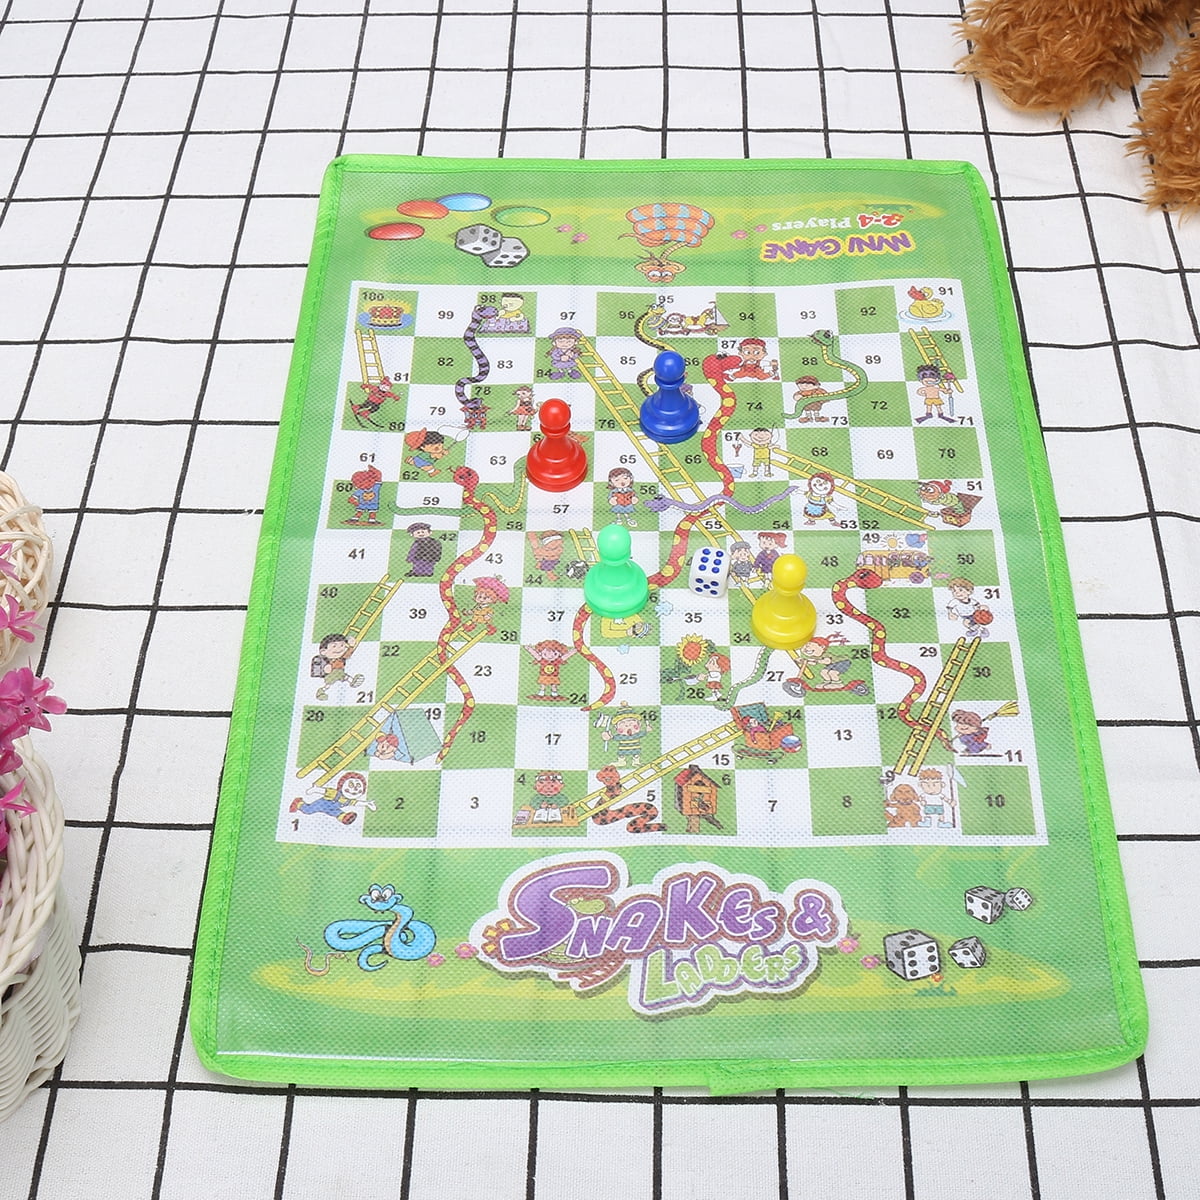 Snakes and Ladders and Ludo Giant Games Board Family Fun Indoor Outdoor Games